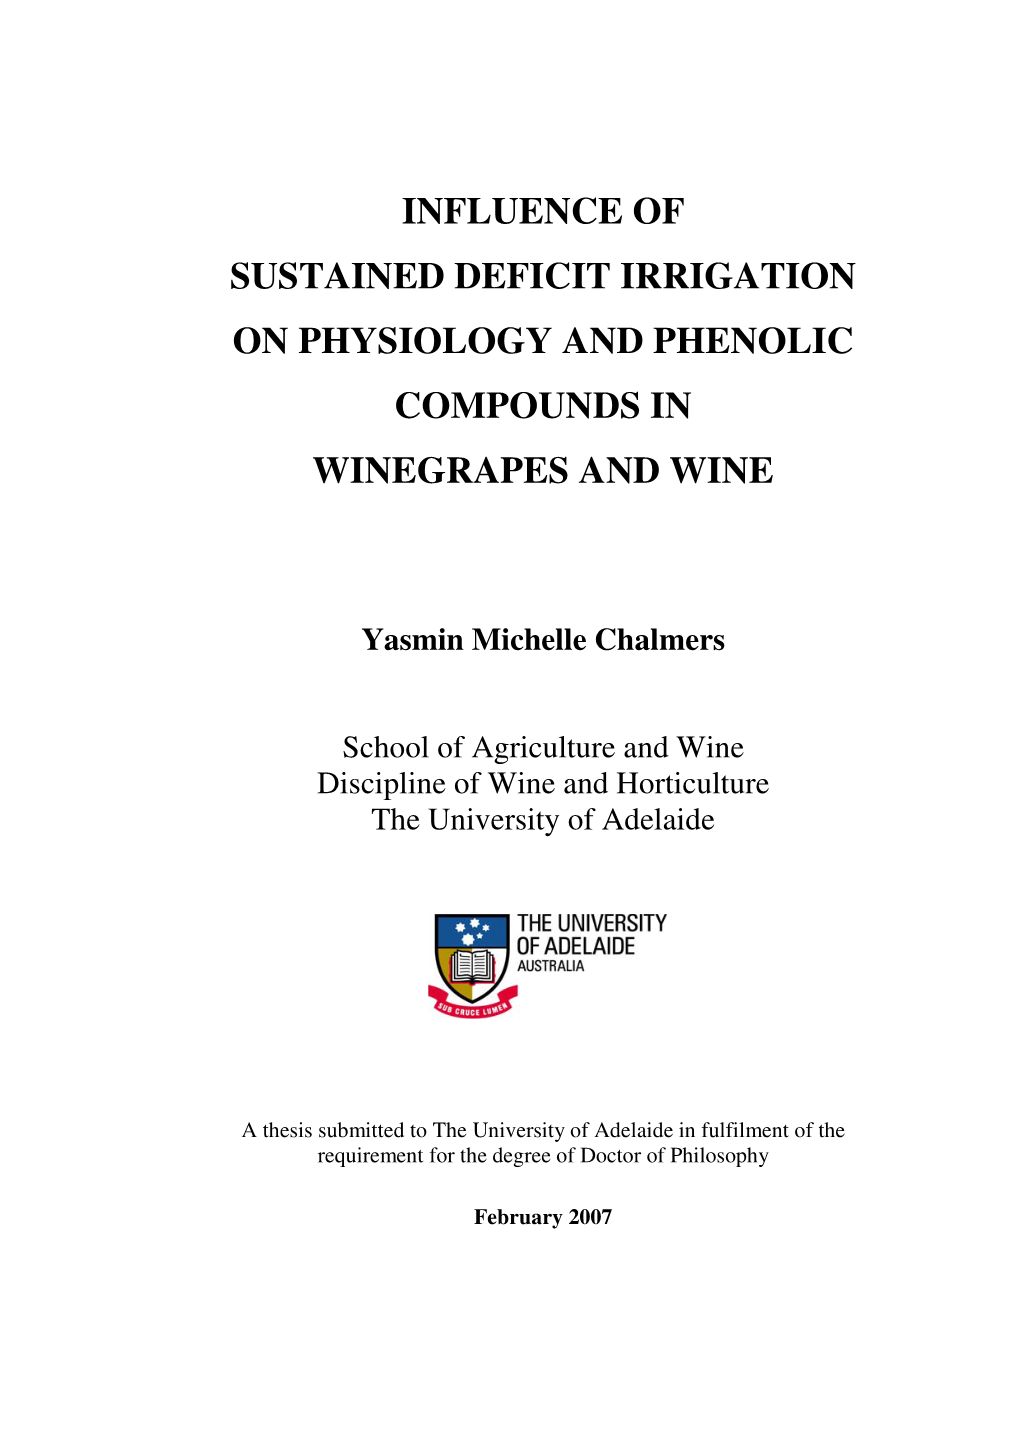 Influence of Sustained Deficit Irrigation on Physiology and Phenolic Compounds in Winegrapes and Wine